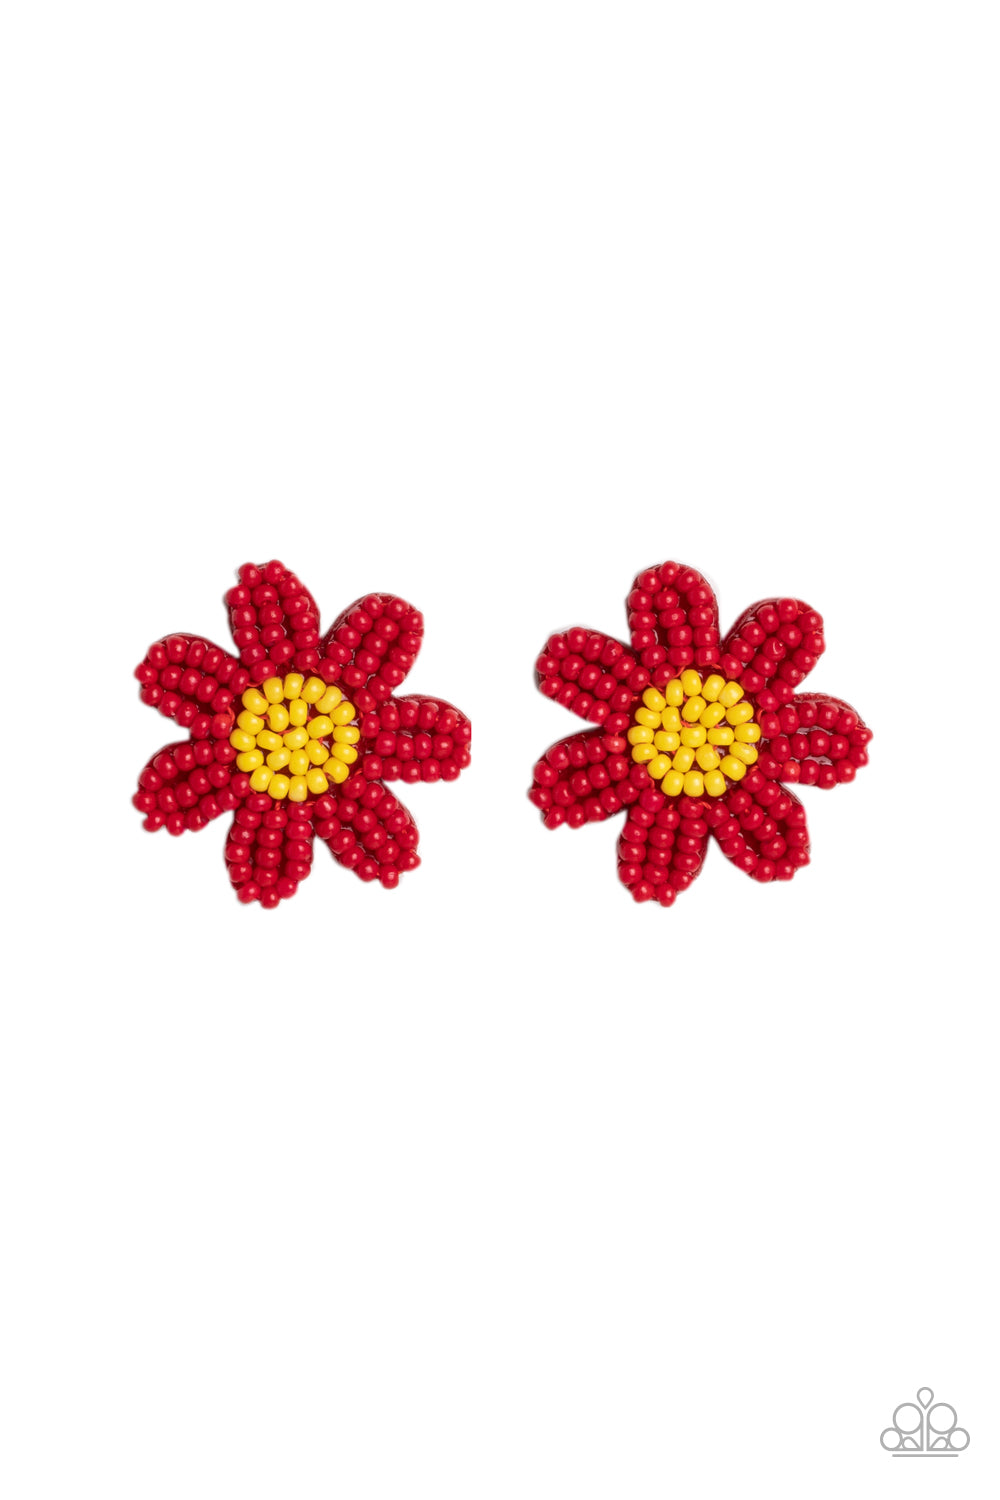 Paparazzi Accessories - Sensational Seeds - Red Seed Bead Earrings layers of red seed bead petals fan out from a yellow seed bead center, blooming into a textured floral centerpiece. Earring attaches to a standard post fitting.  Sold as one pair of post earrings.